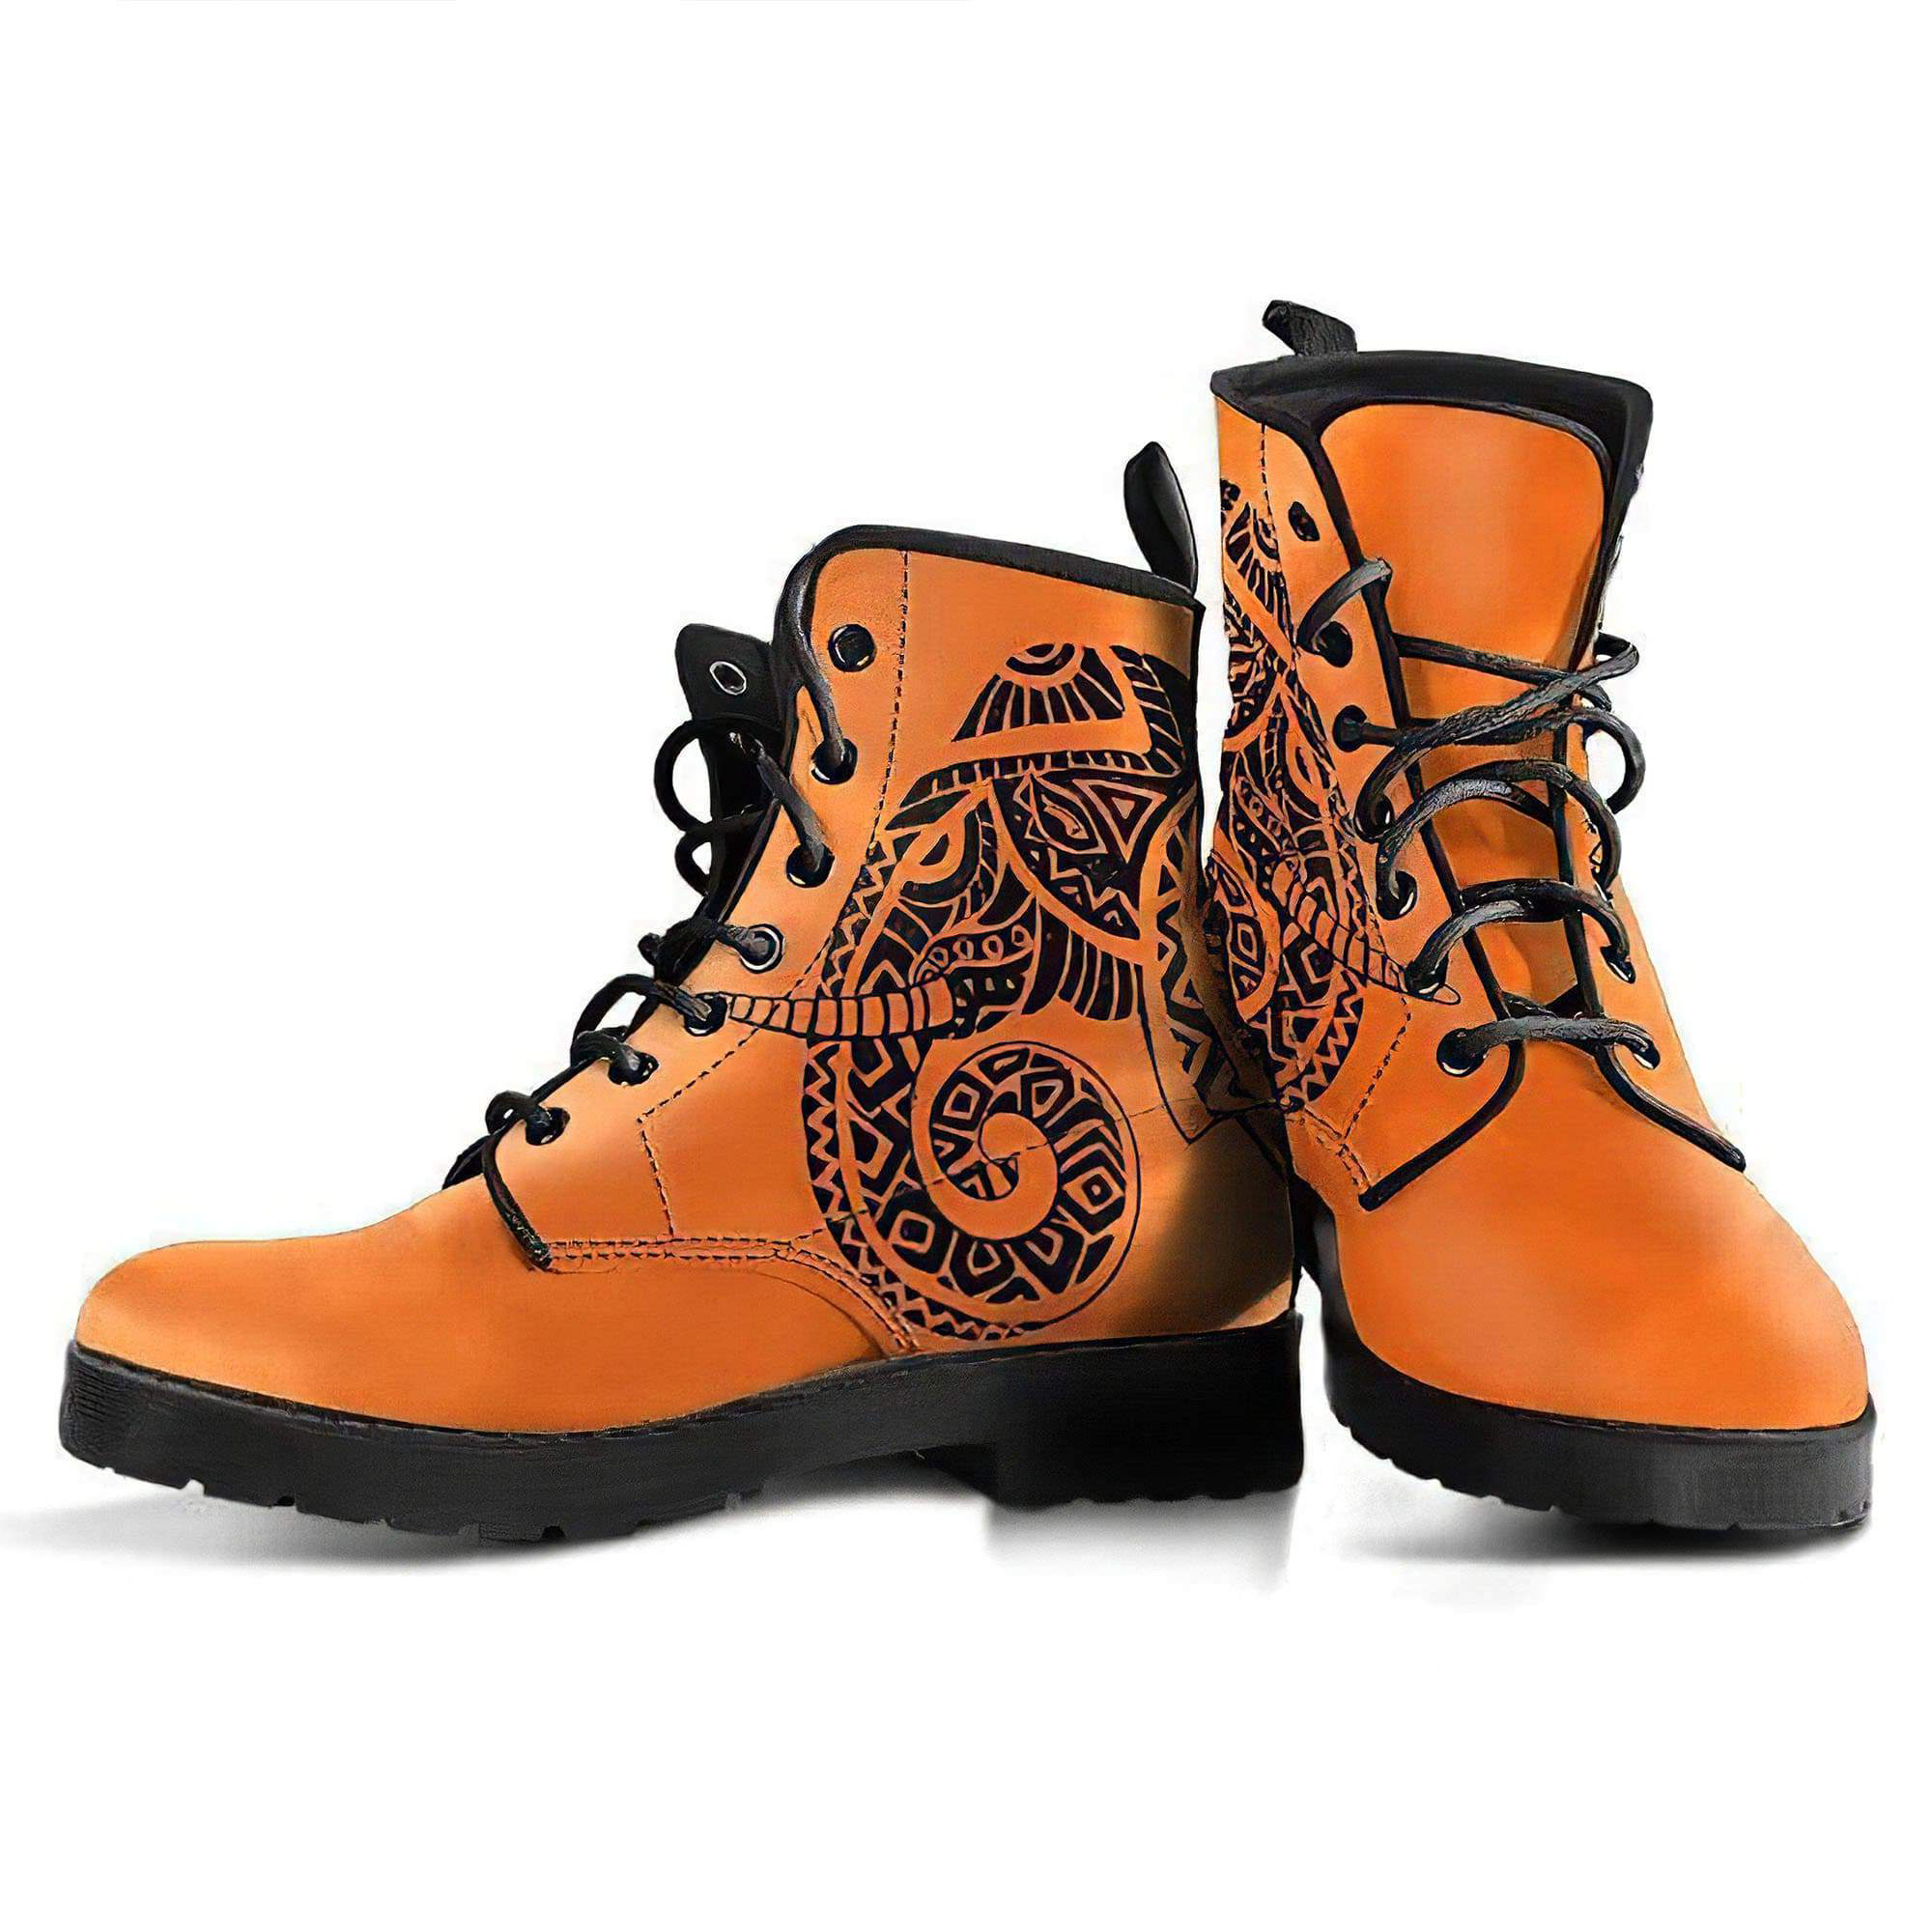 tribal-totem-women-s-leather-boots-women-s-leather-boots-12051970097213.jpg